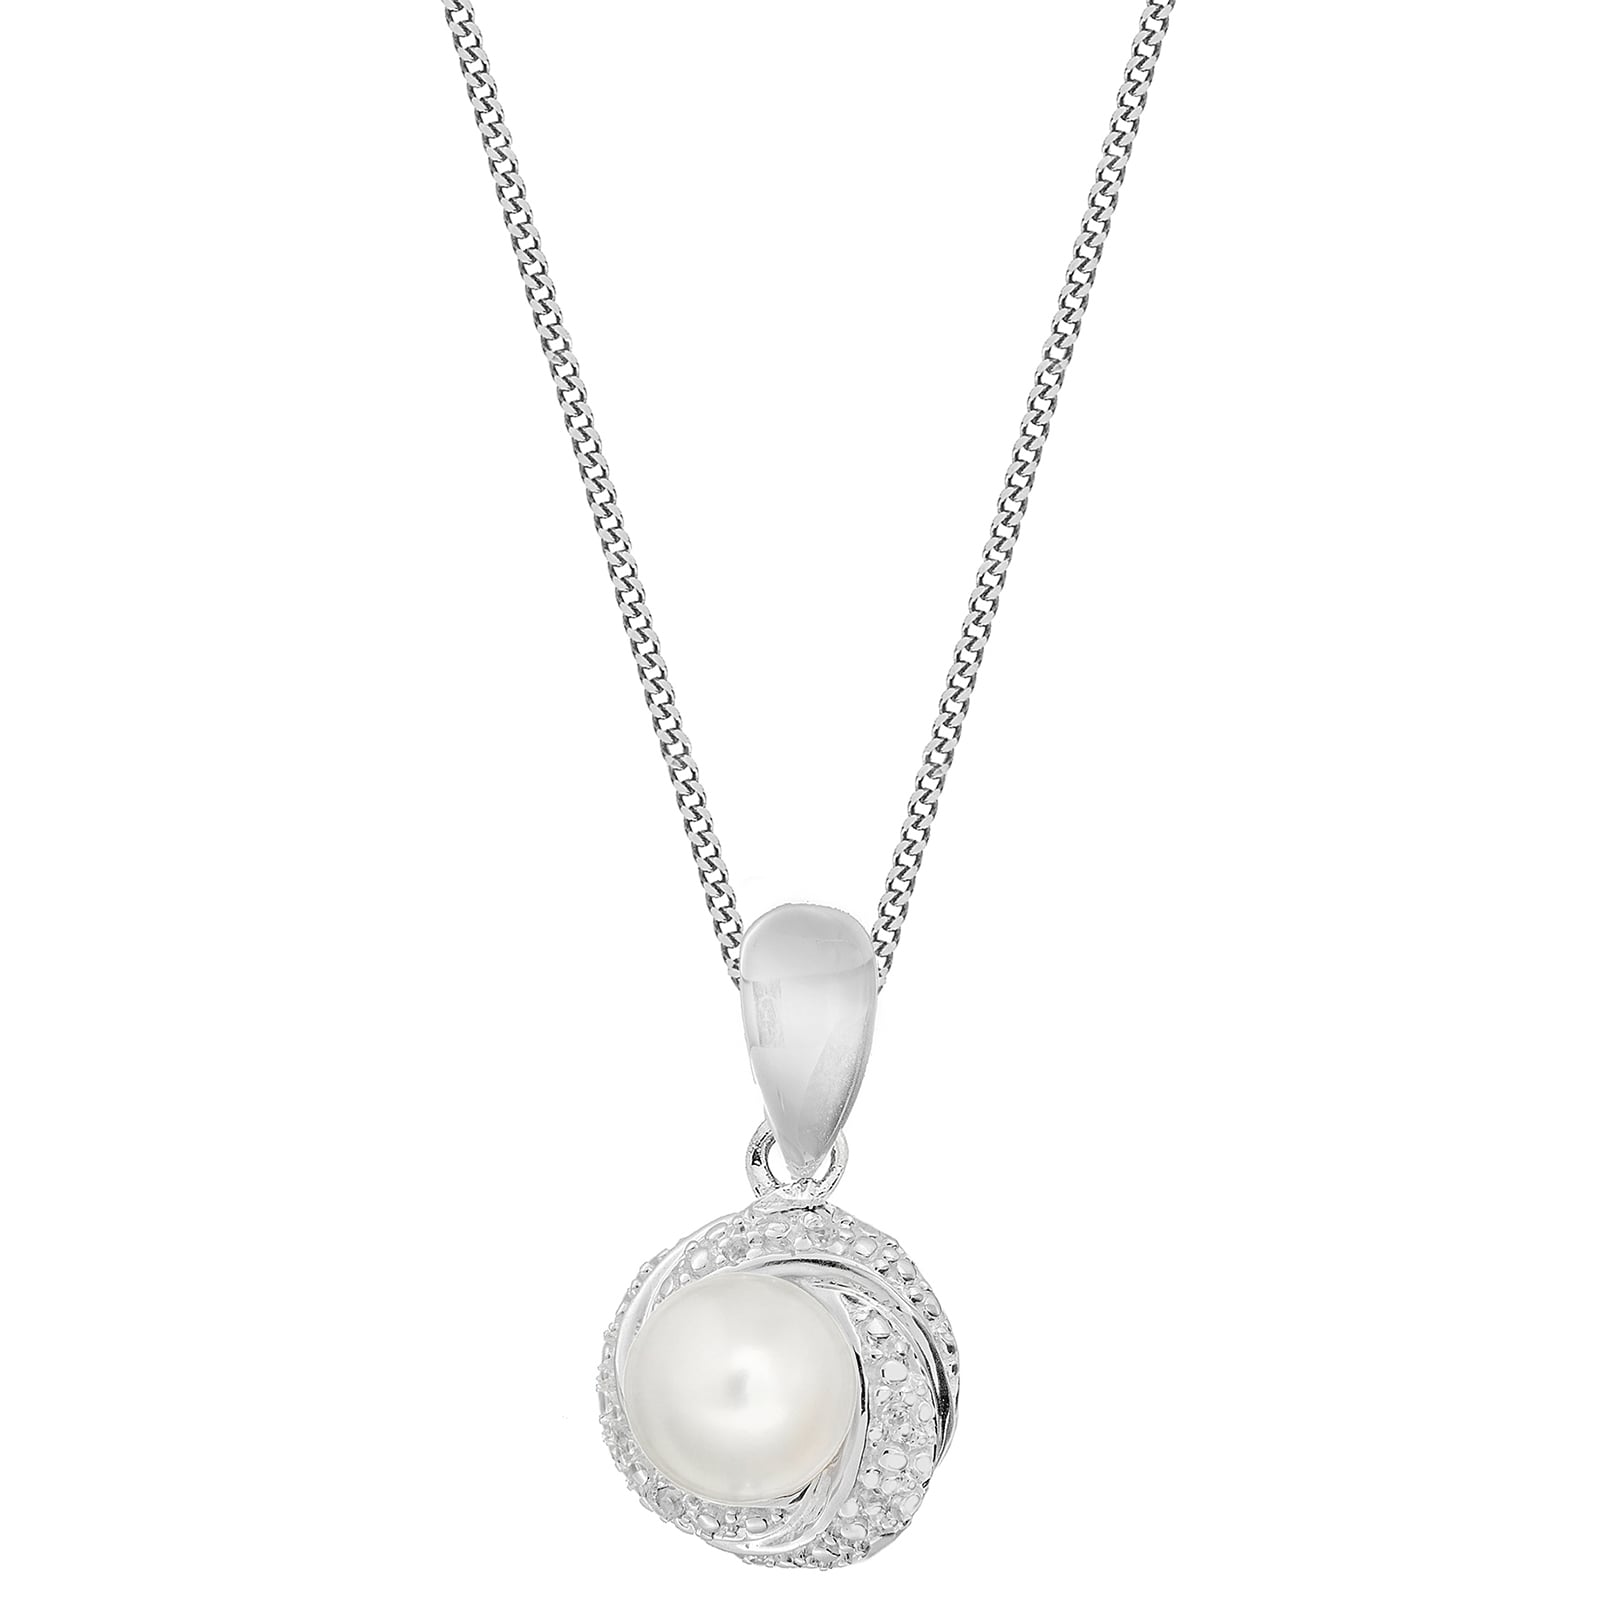 Sterling Silver Cubic Zirconia and Cultured Fresh Water Pearl Pendant